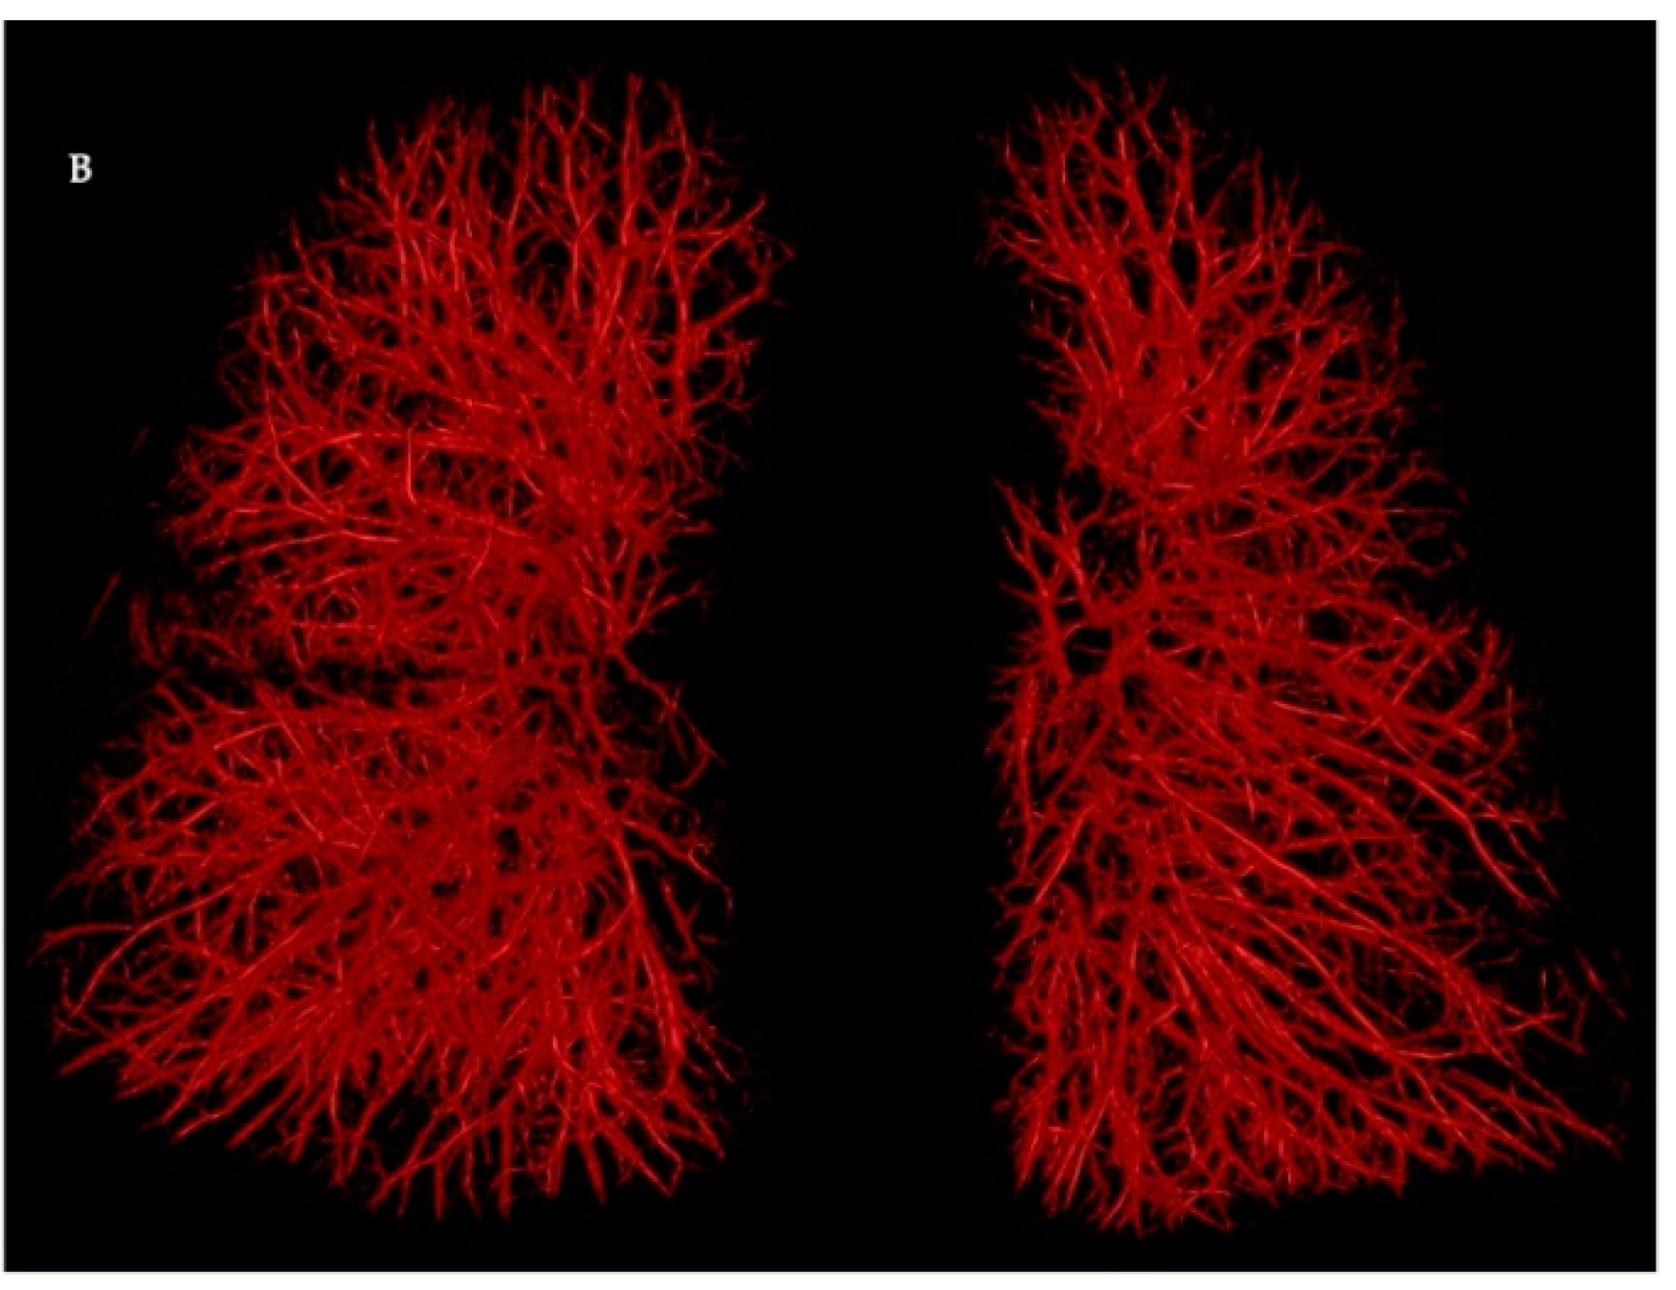 A photograph shows a latex cast of the pulmonary circulation. The cast is red branching network structure that form the shape of two lungs.